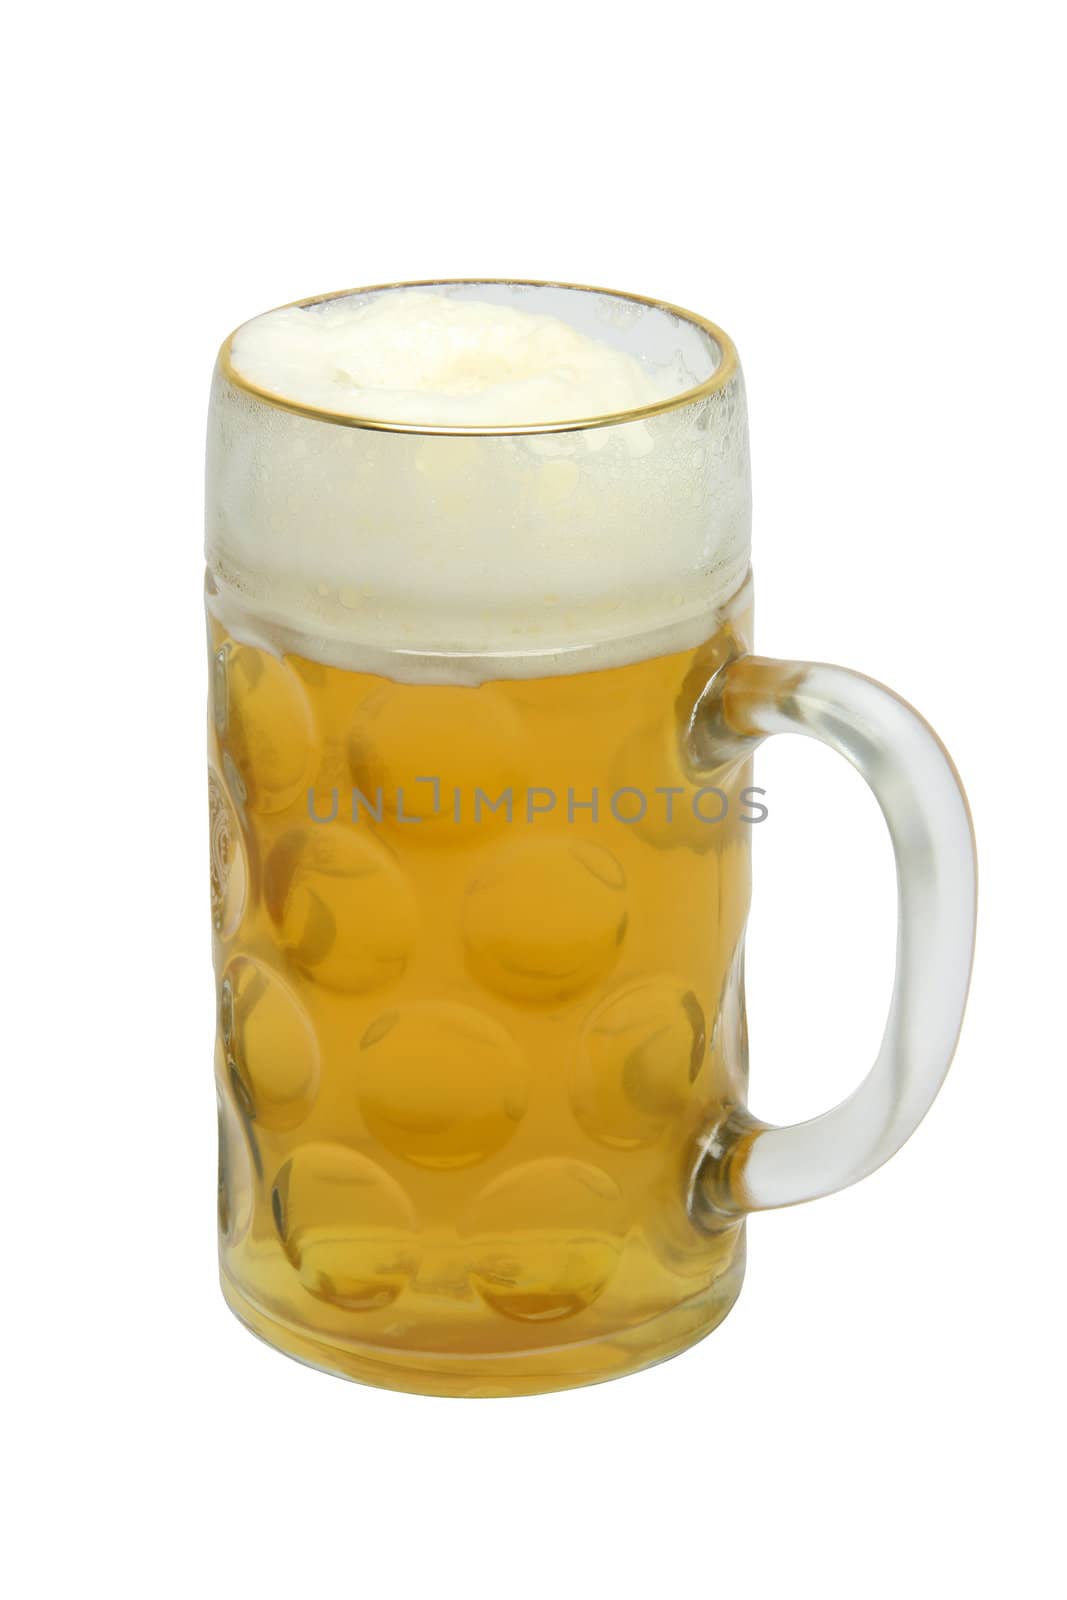 classic bavarian beer mug isolated on white background with clipping path